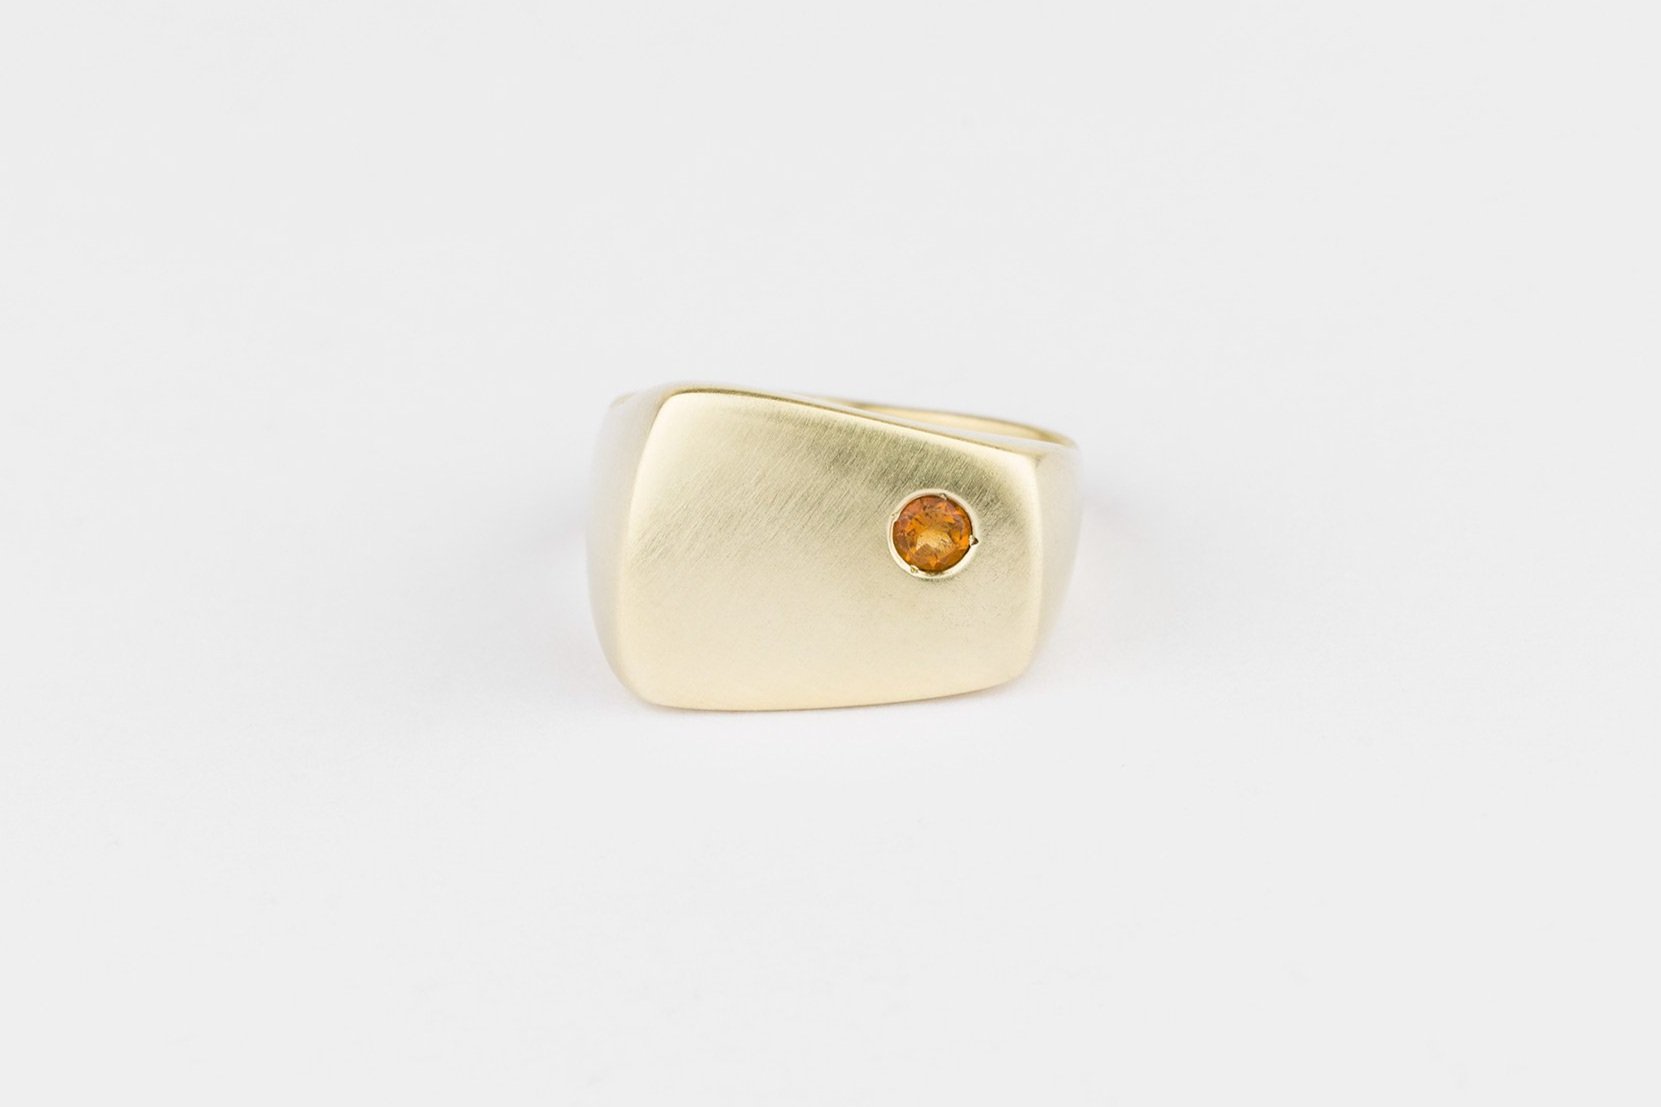 cecilia+stamp+-+bespoke+signet+gold+ring+with+citrine.jpg